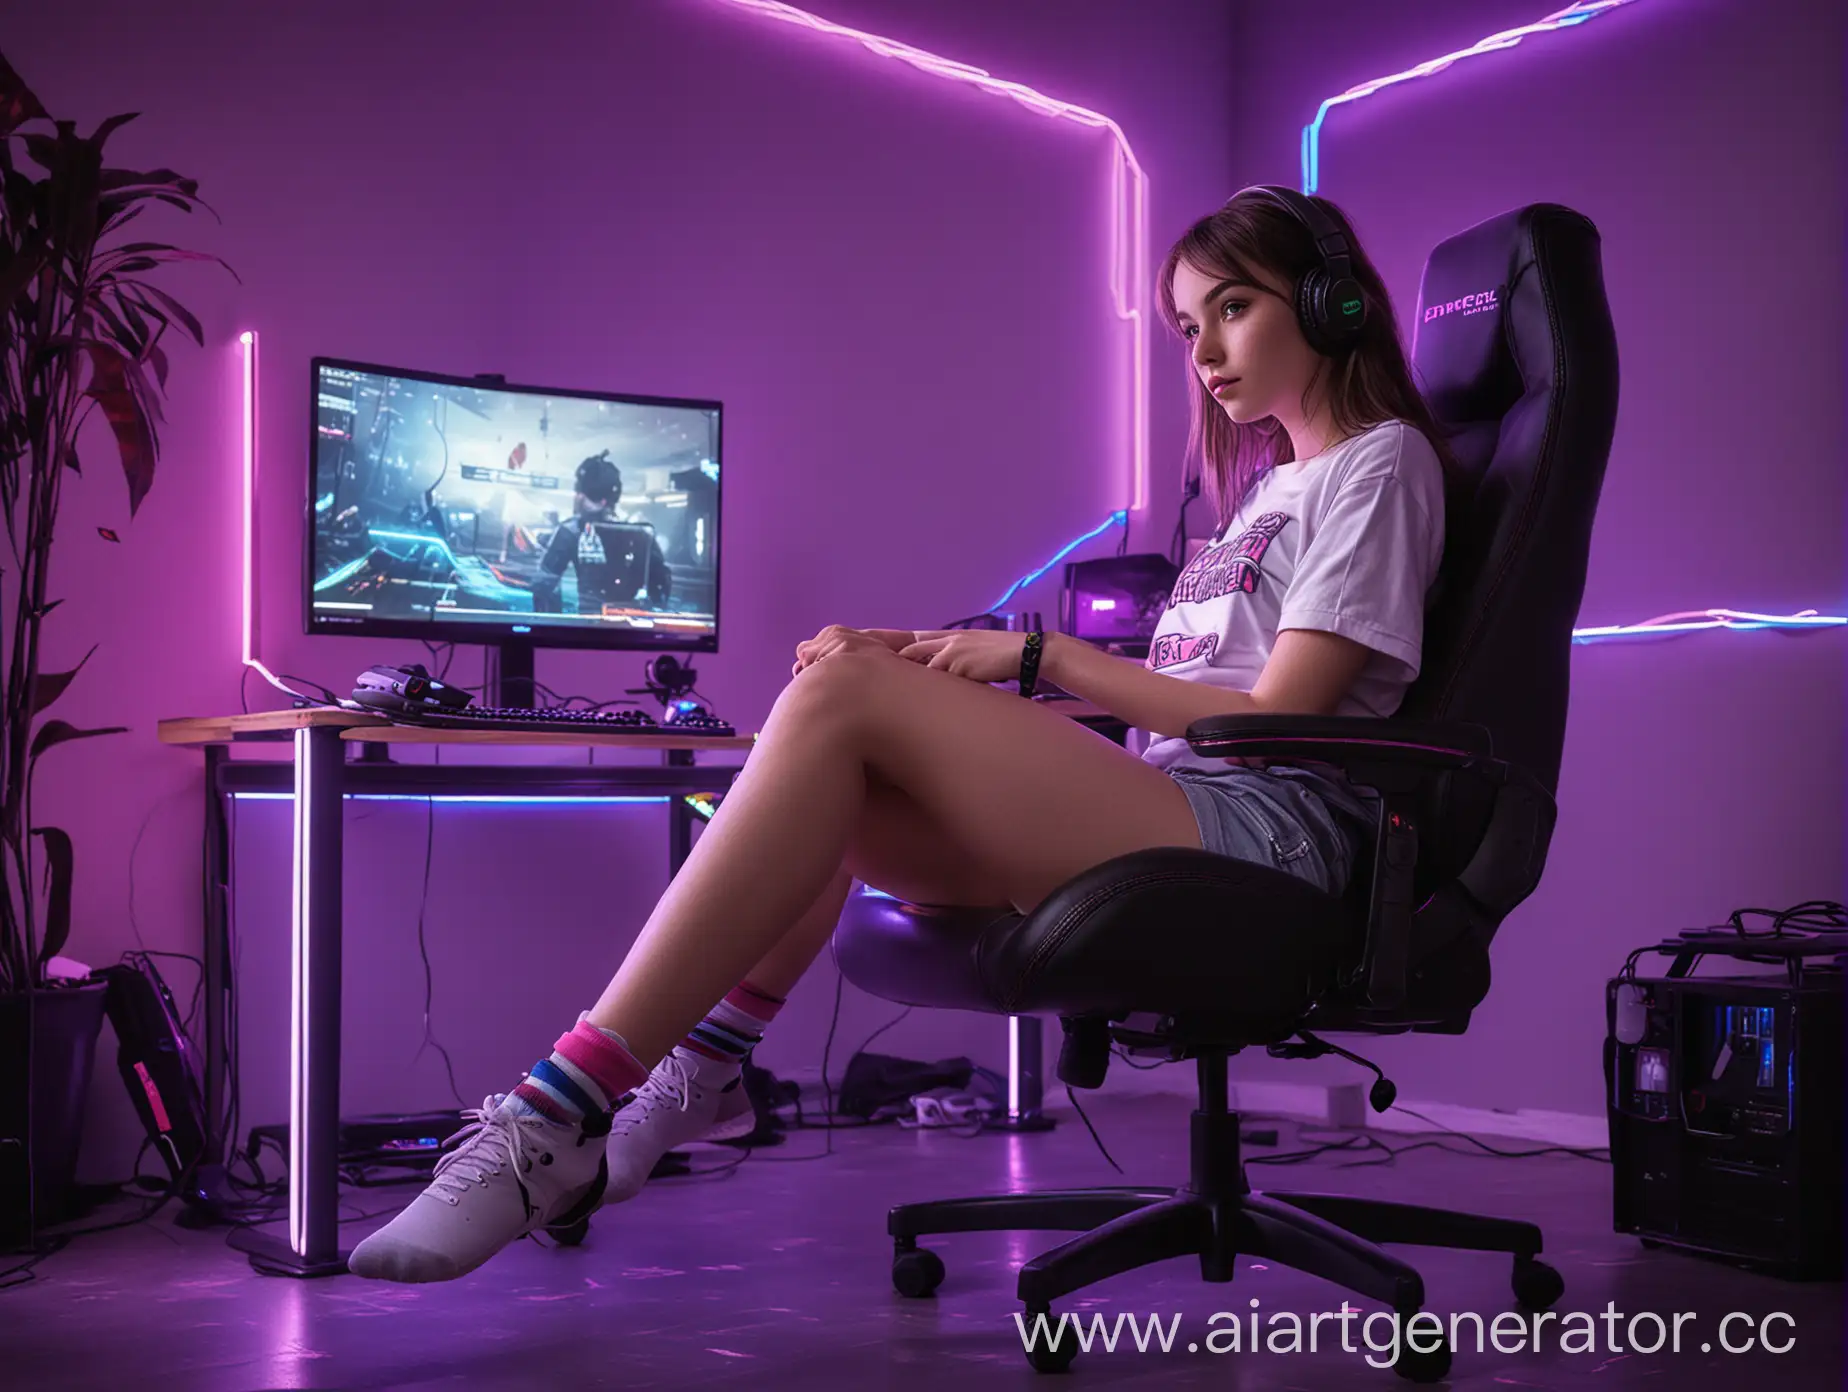 Young-Girl-Gaming-in-NeonLit-Atmosphere